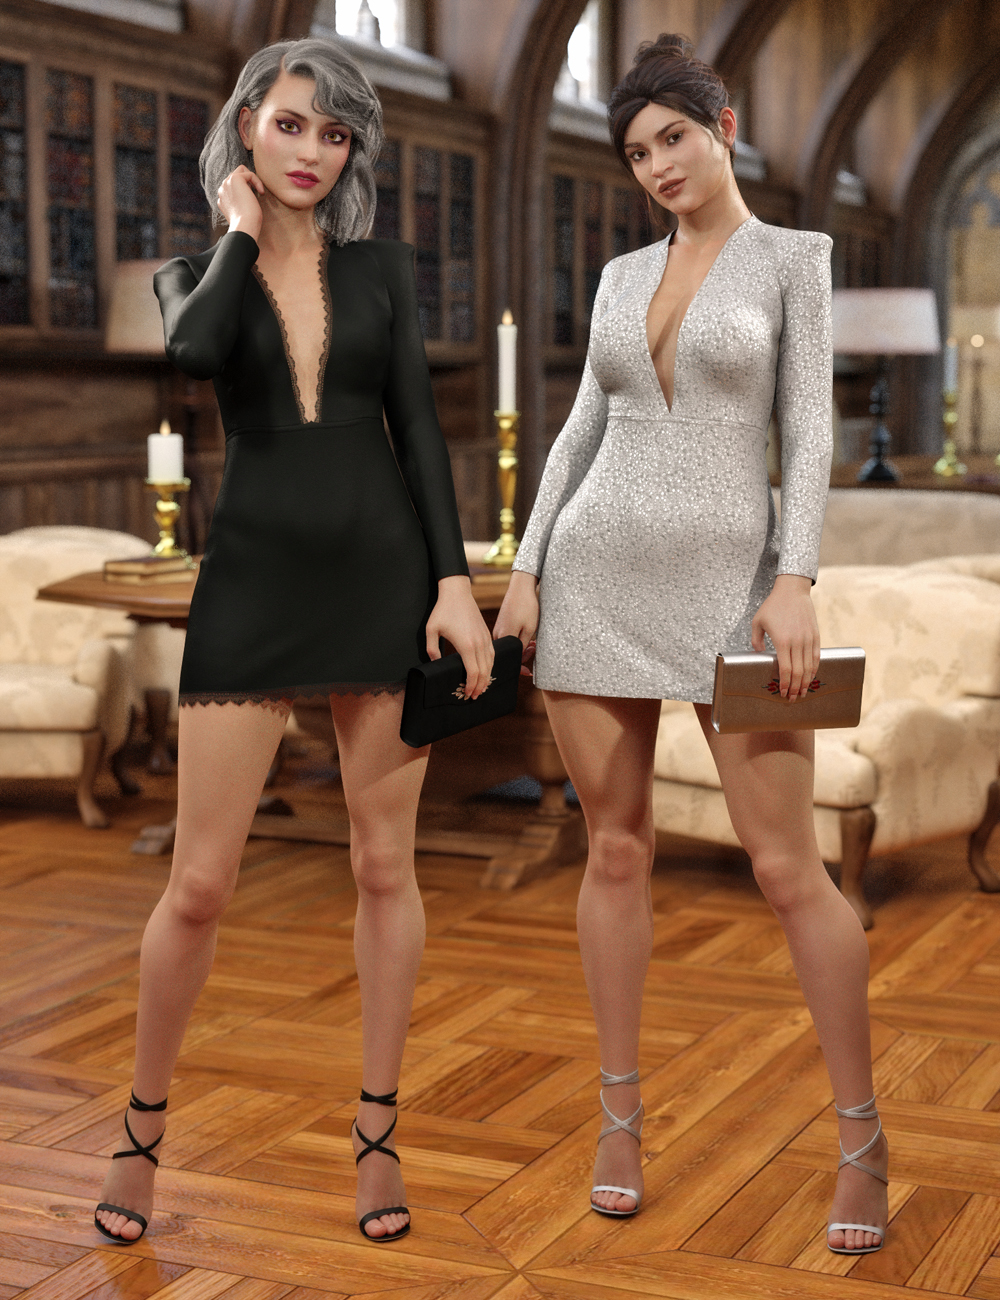 dForce Chic Club Outfit Textures by: DirtyFairy, 3D Models by Daz 3D